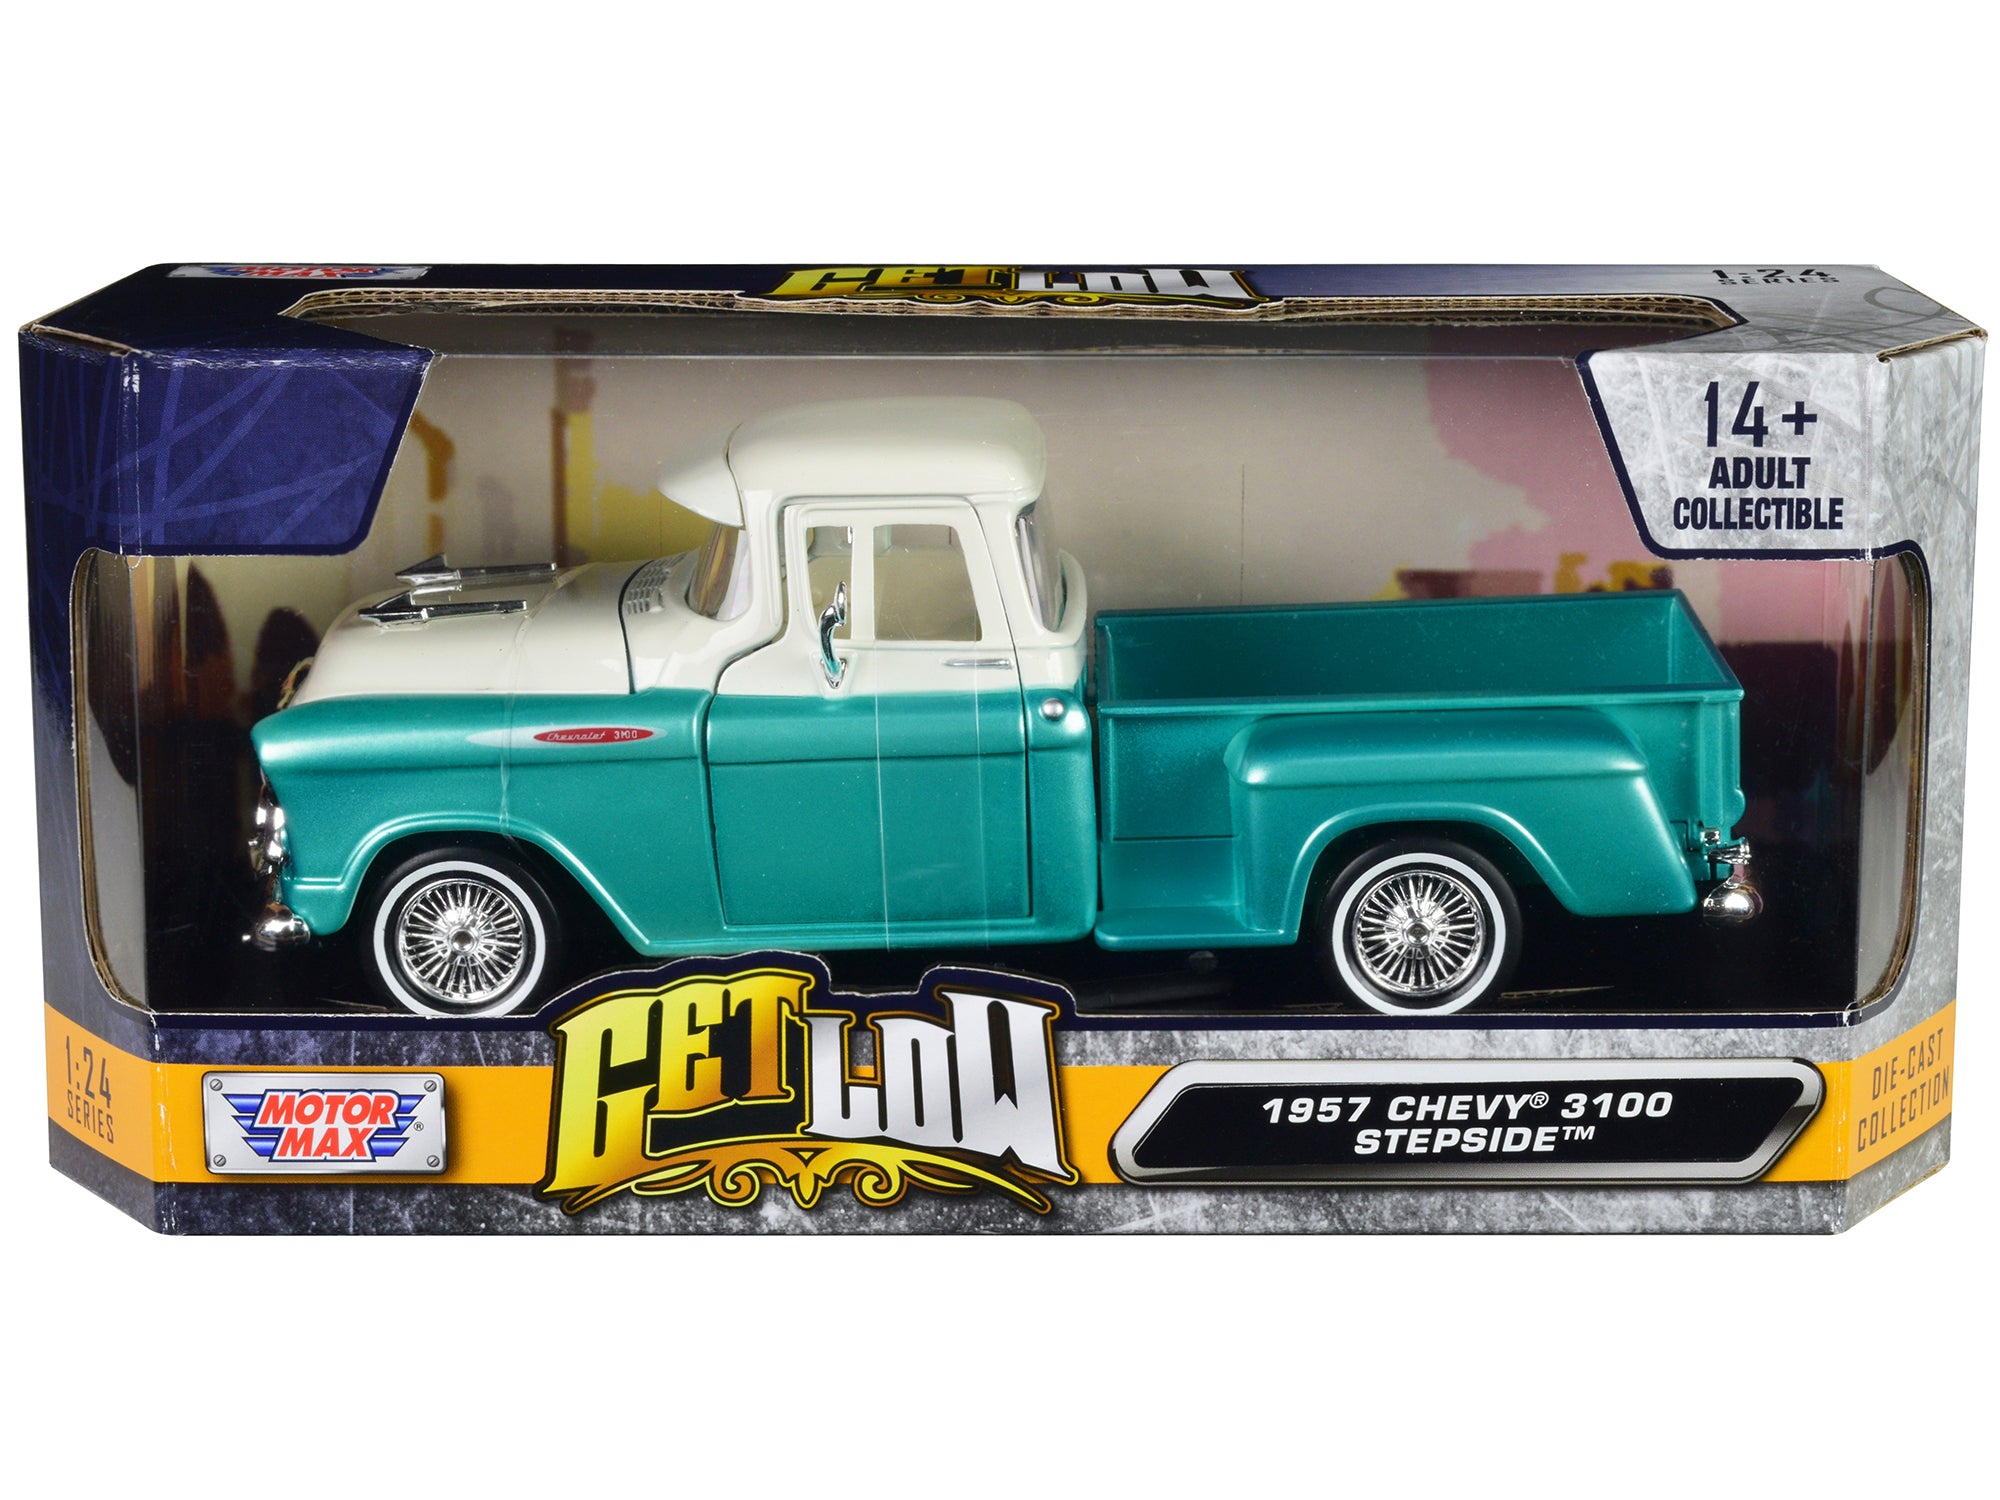 1957 Chevrolet 3100 Stepside Pickup Truck Lowrider Turquoise Metallic and White with White Interior 